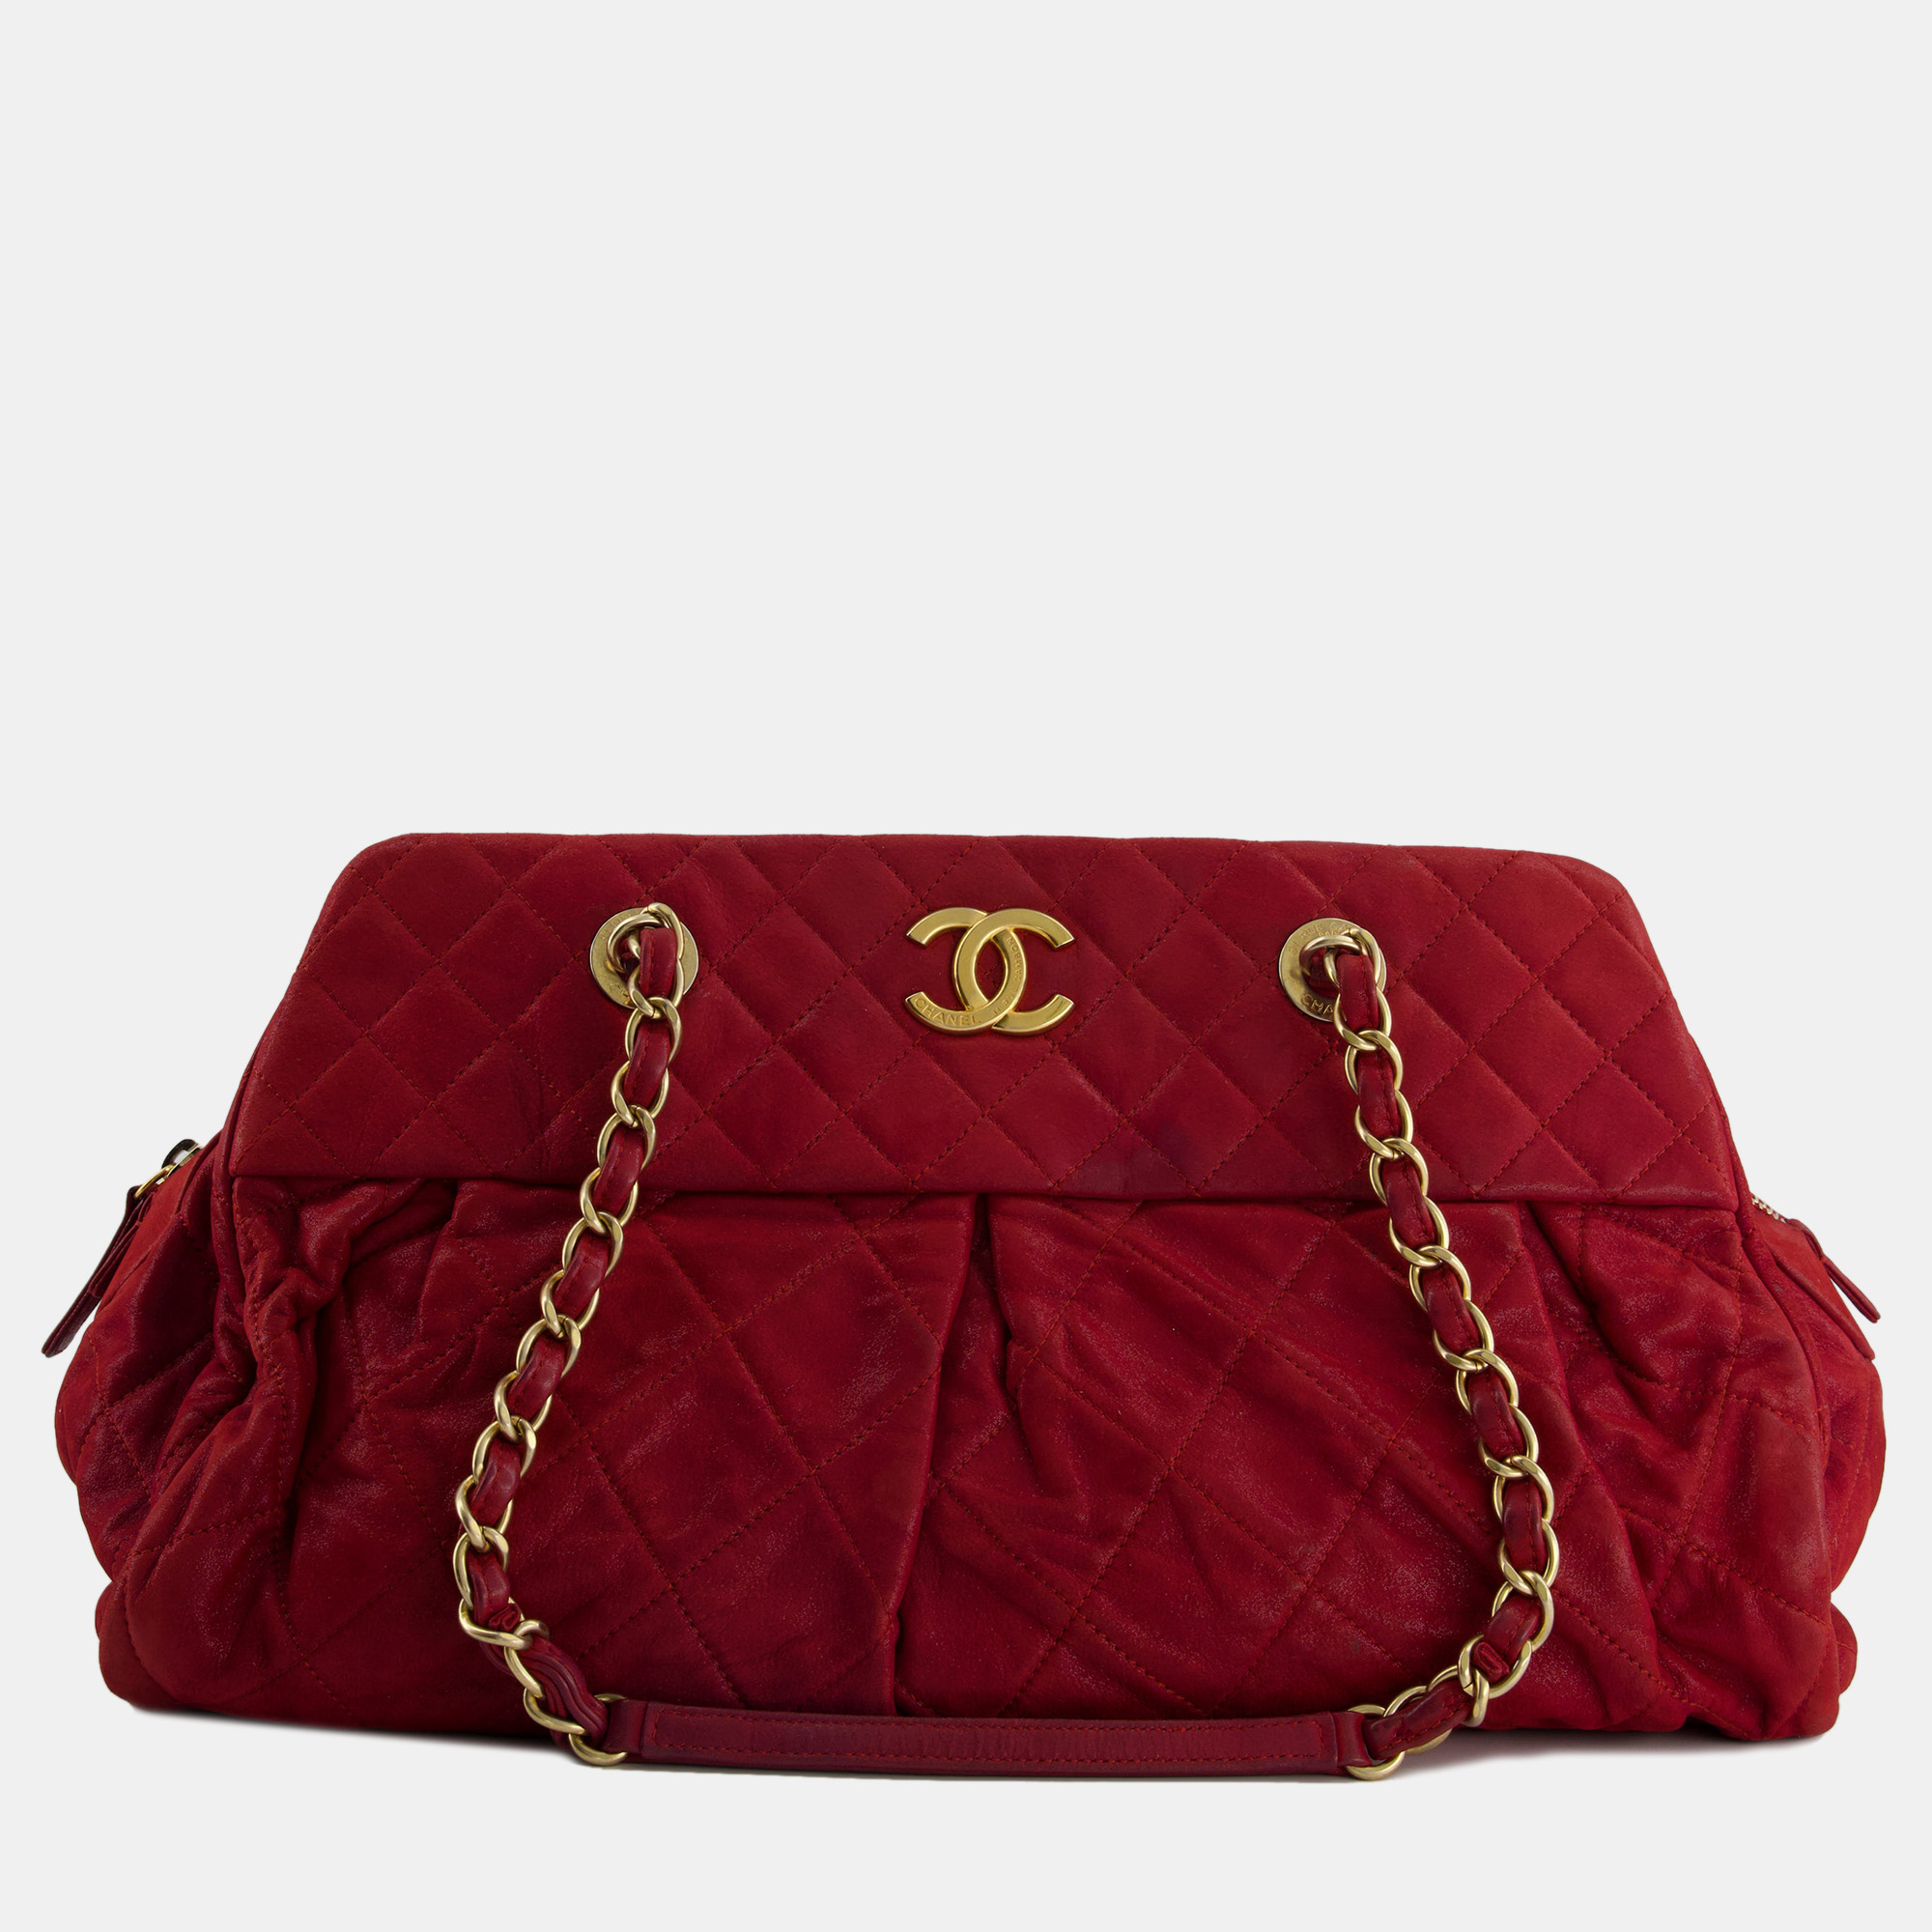 Elevate your style with this Chanel shoulder bag. Merging form and function this exquisite accessory epitomizes sophistication ensuring you stand out with elegance and practicality by your side.